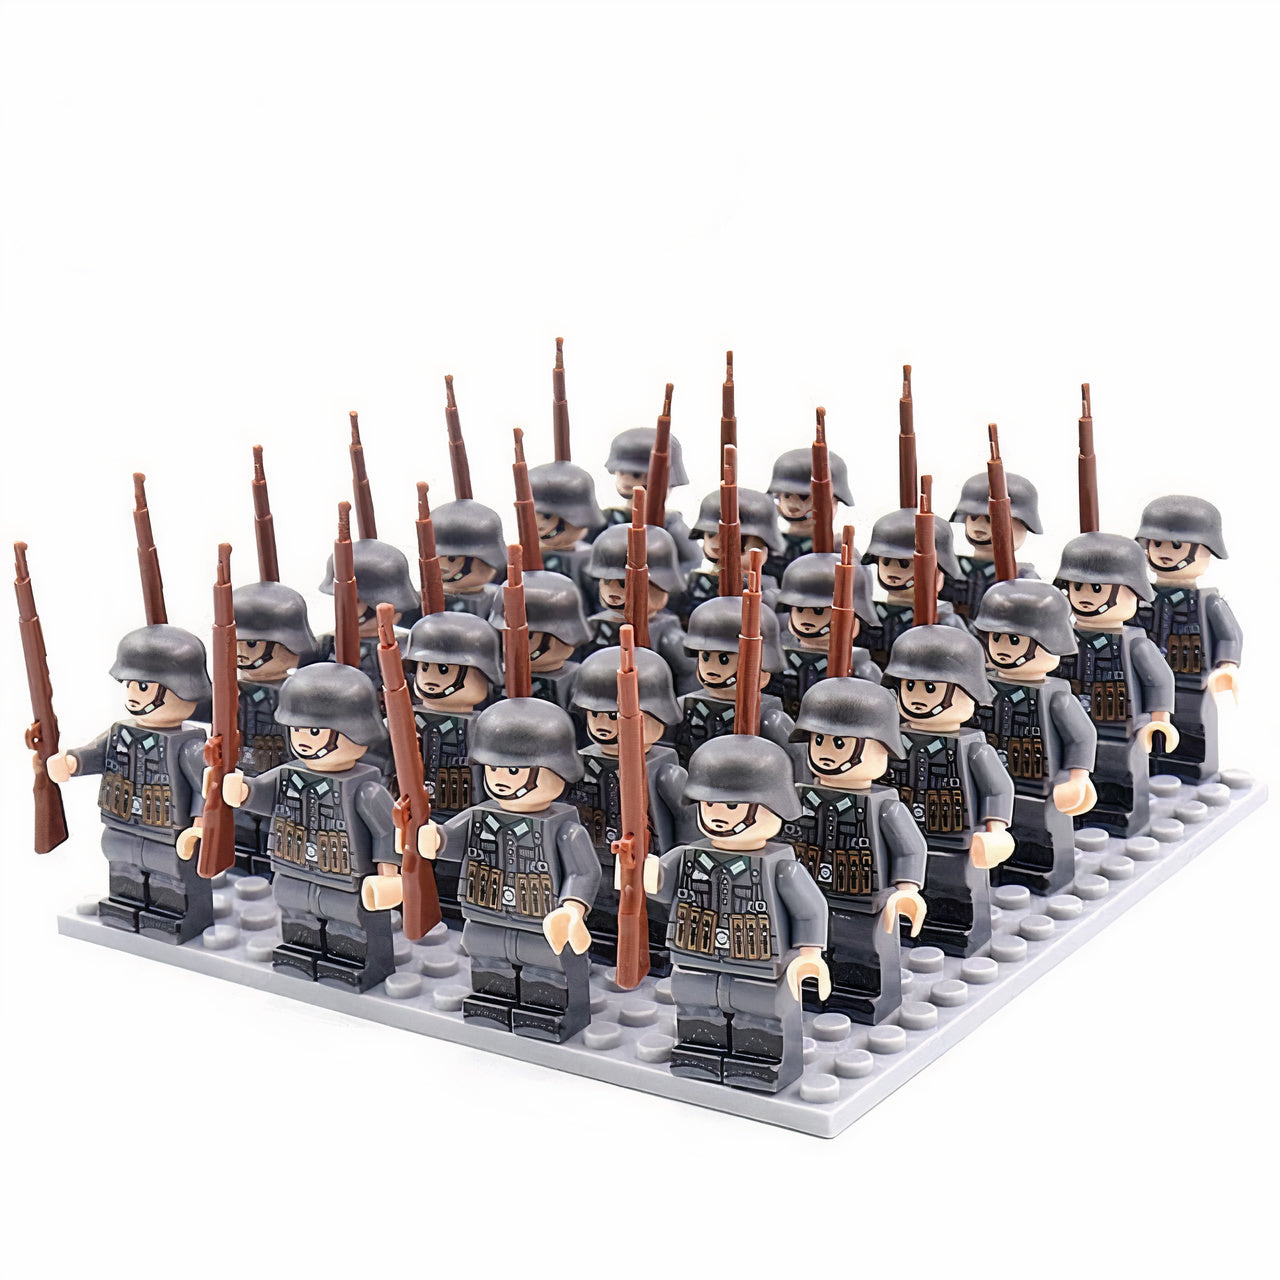 181st Infantry Division German WWII Soldiers (24 Figures)